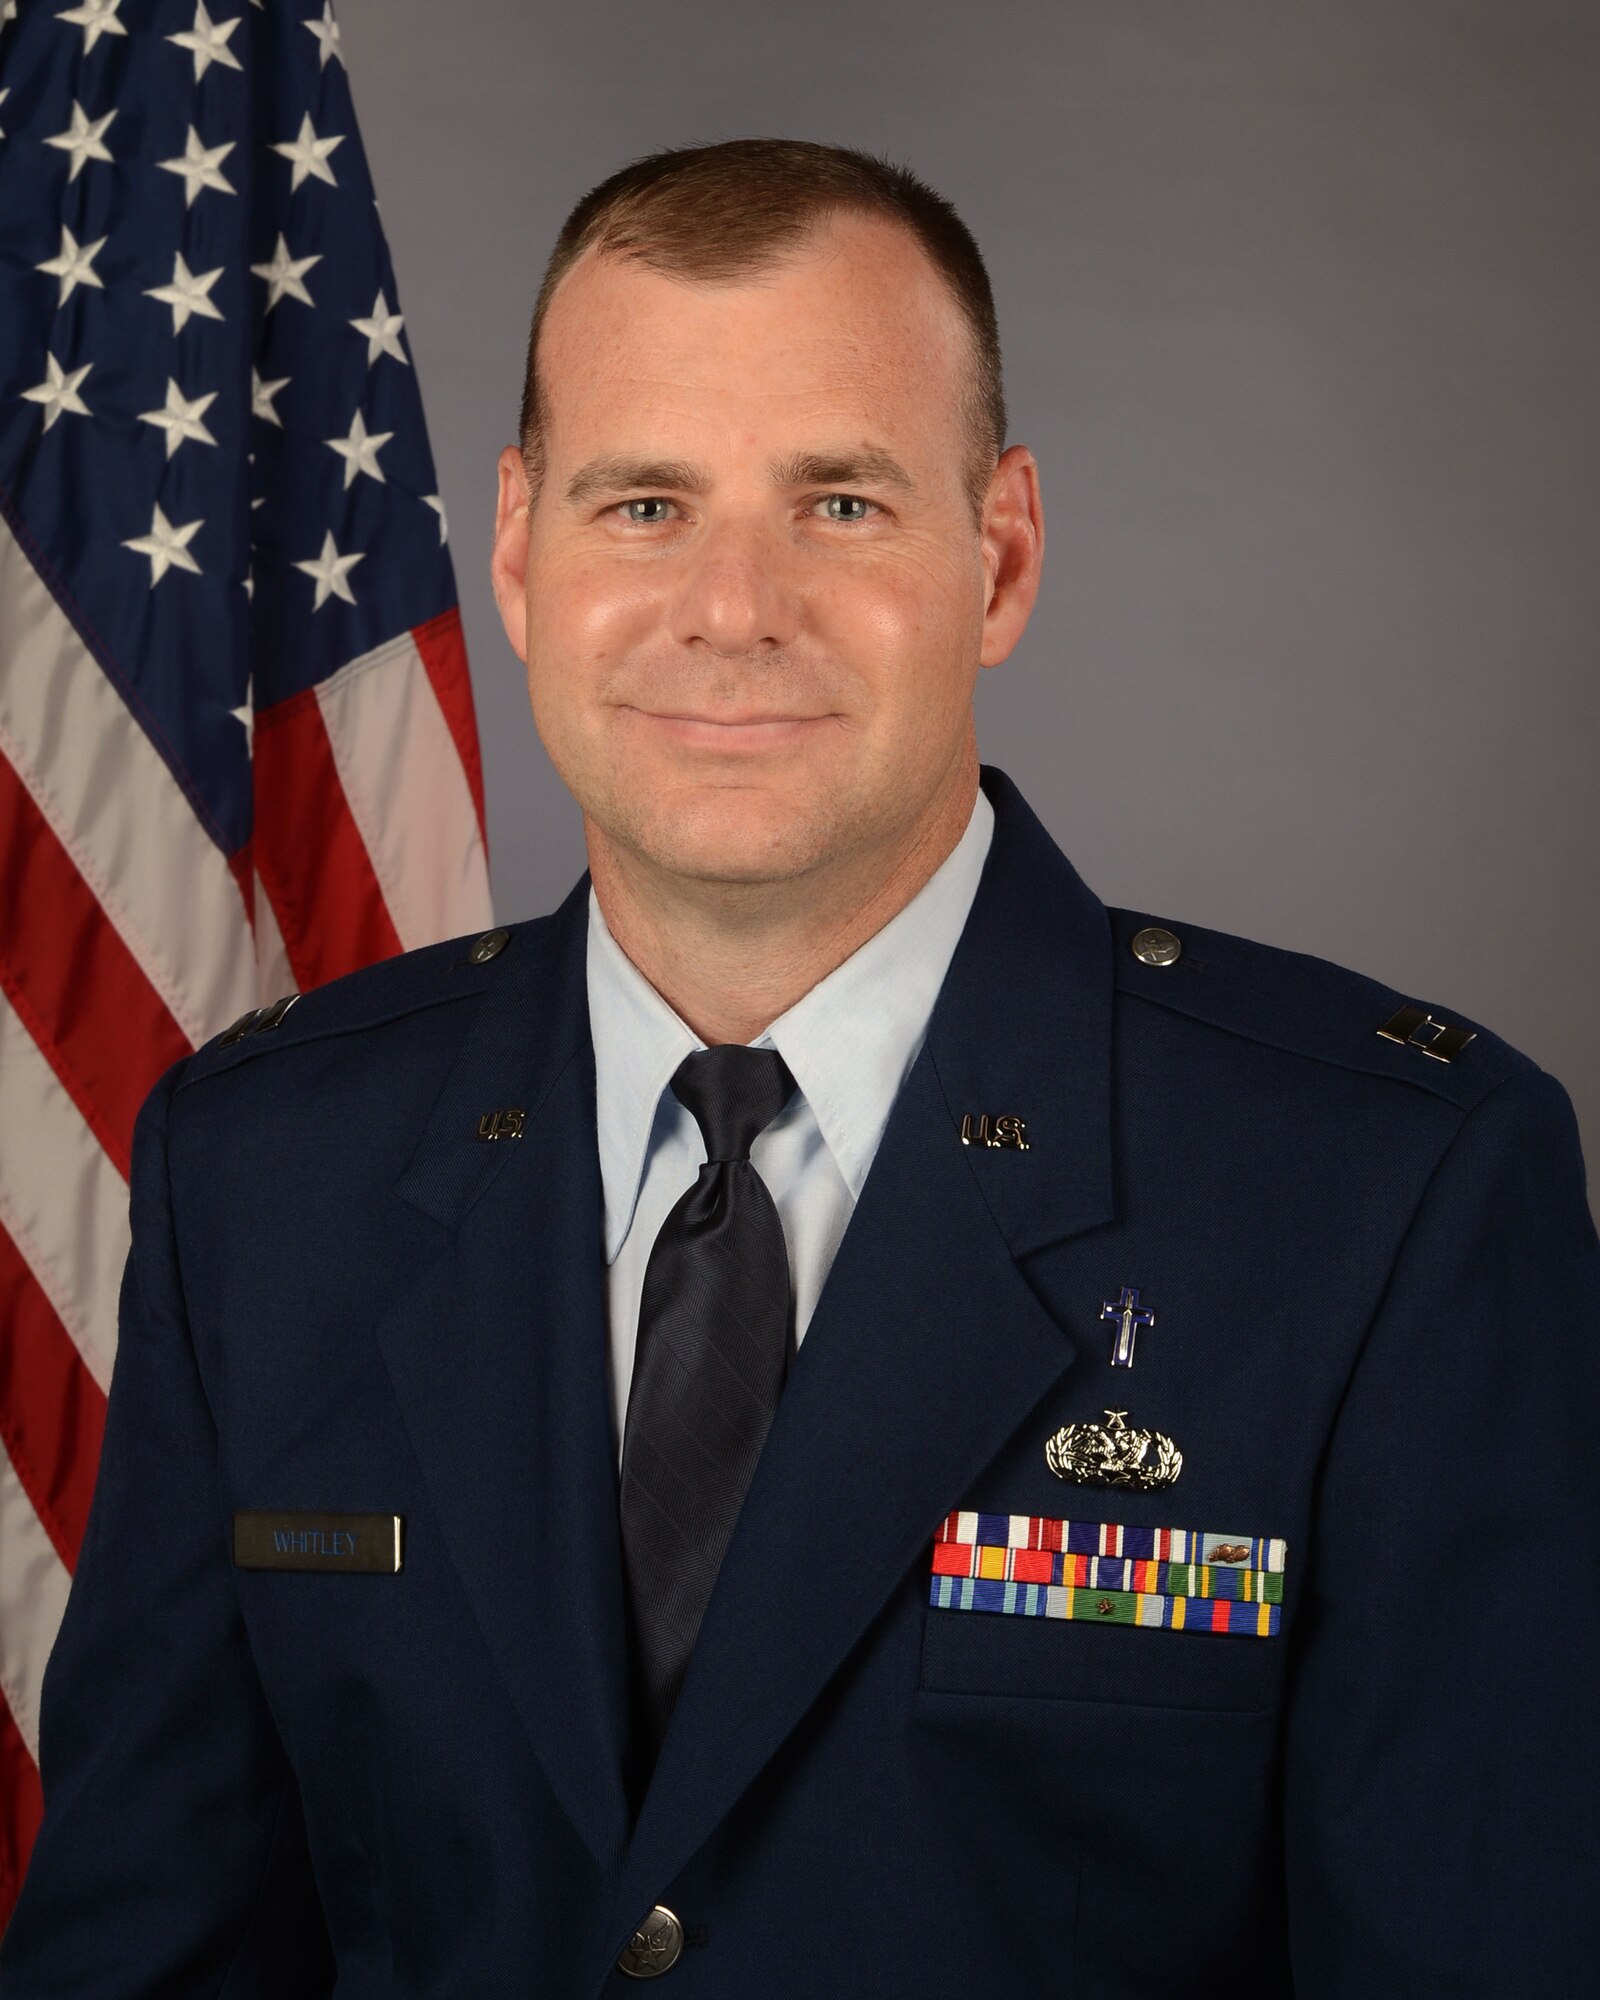 U.S. Air Force Capt. Kirby Whitley, 169th Fighter Wing chaplain at McEntire Joint National Guard Base, South Carolina, May 4, 2021. (U.S. Air National Guard photo by Senior Master Sgt. Edward Snyder, 169th Fighter Wing Public Affairs)